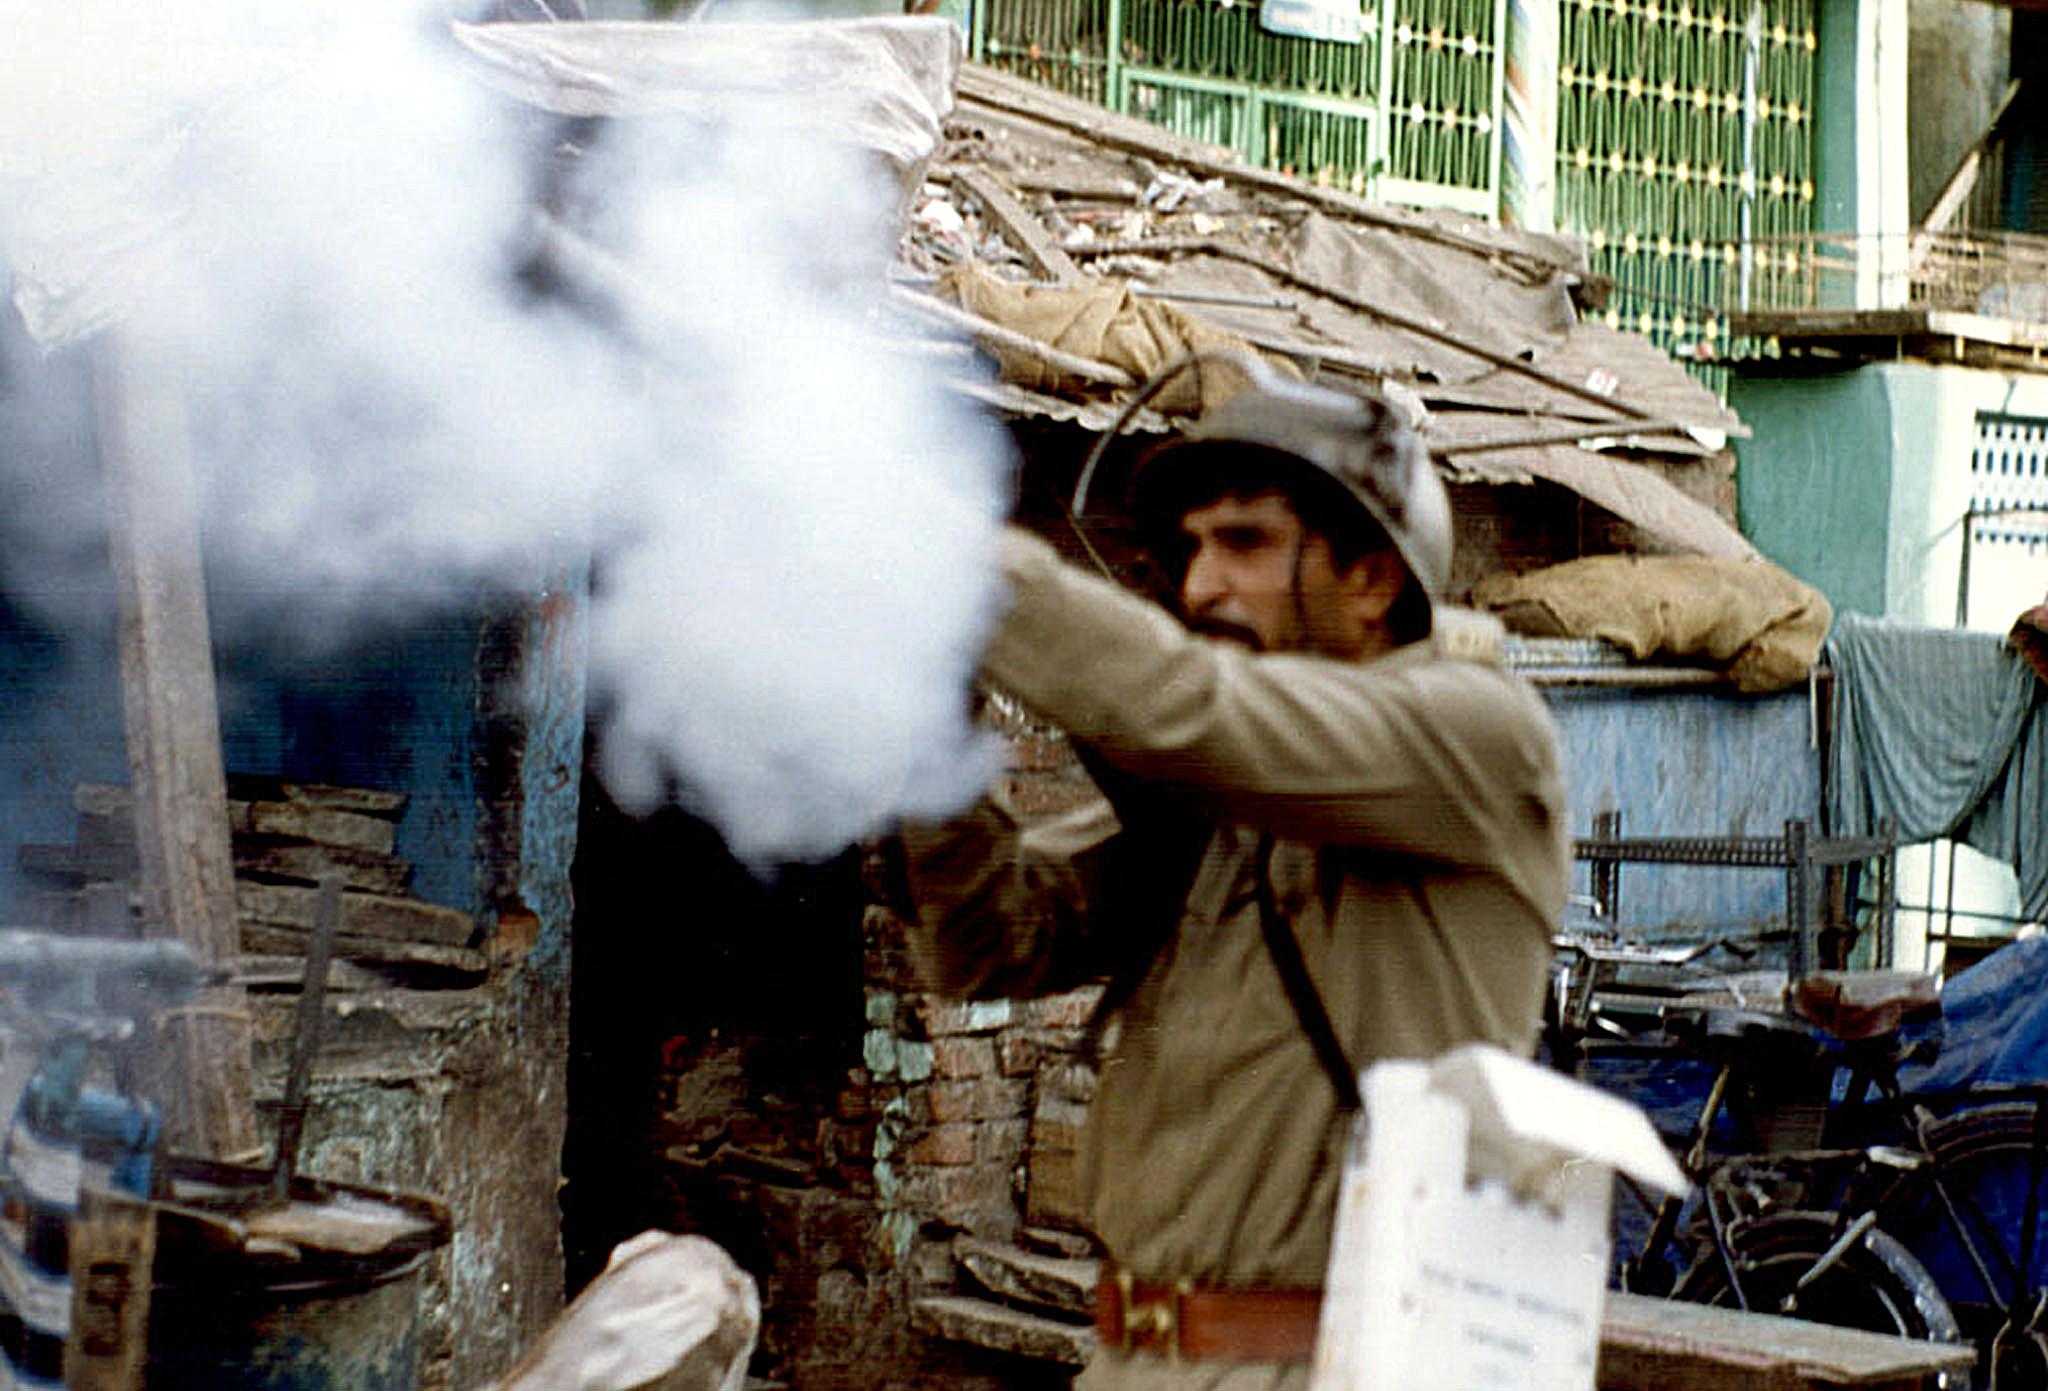 An Indian policeman shoot tear gas at rioters in Ahmedabad, 5 April 2002